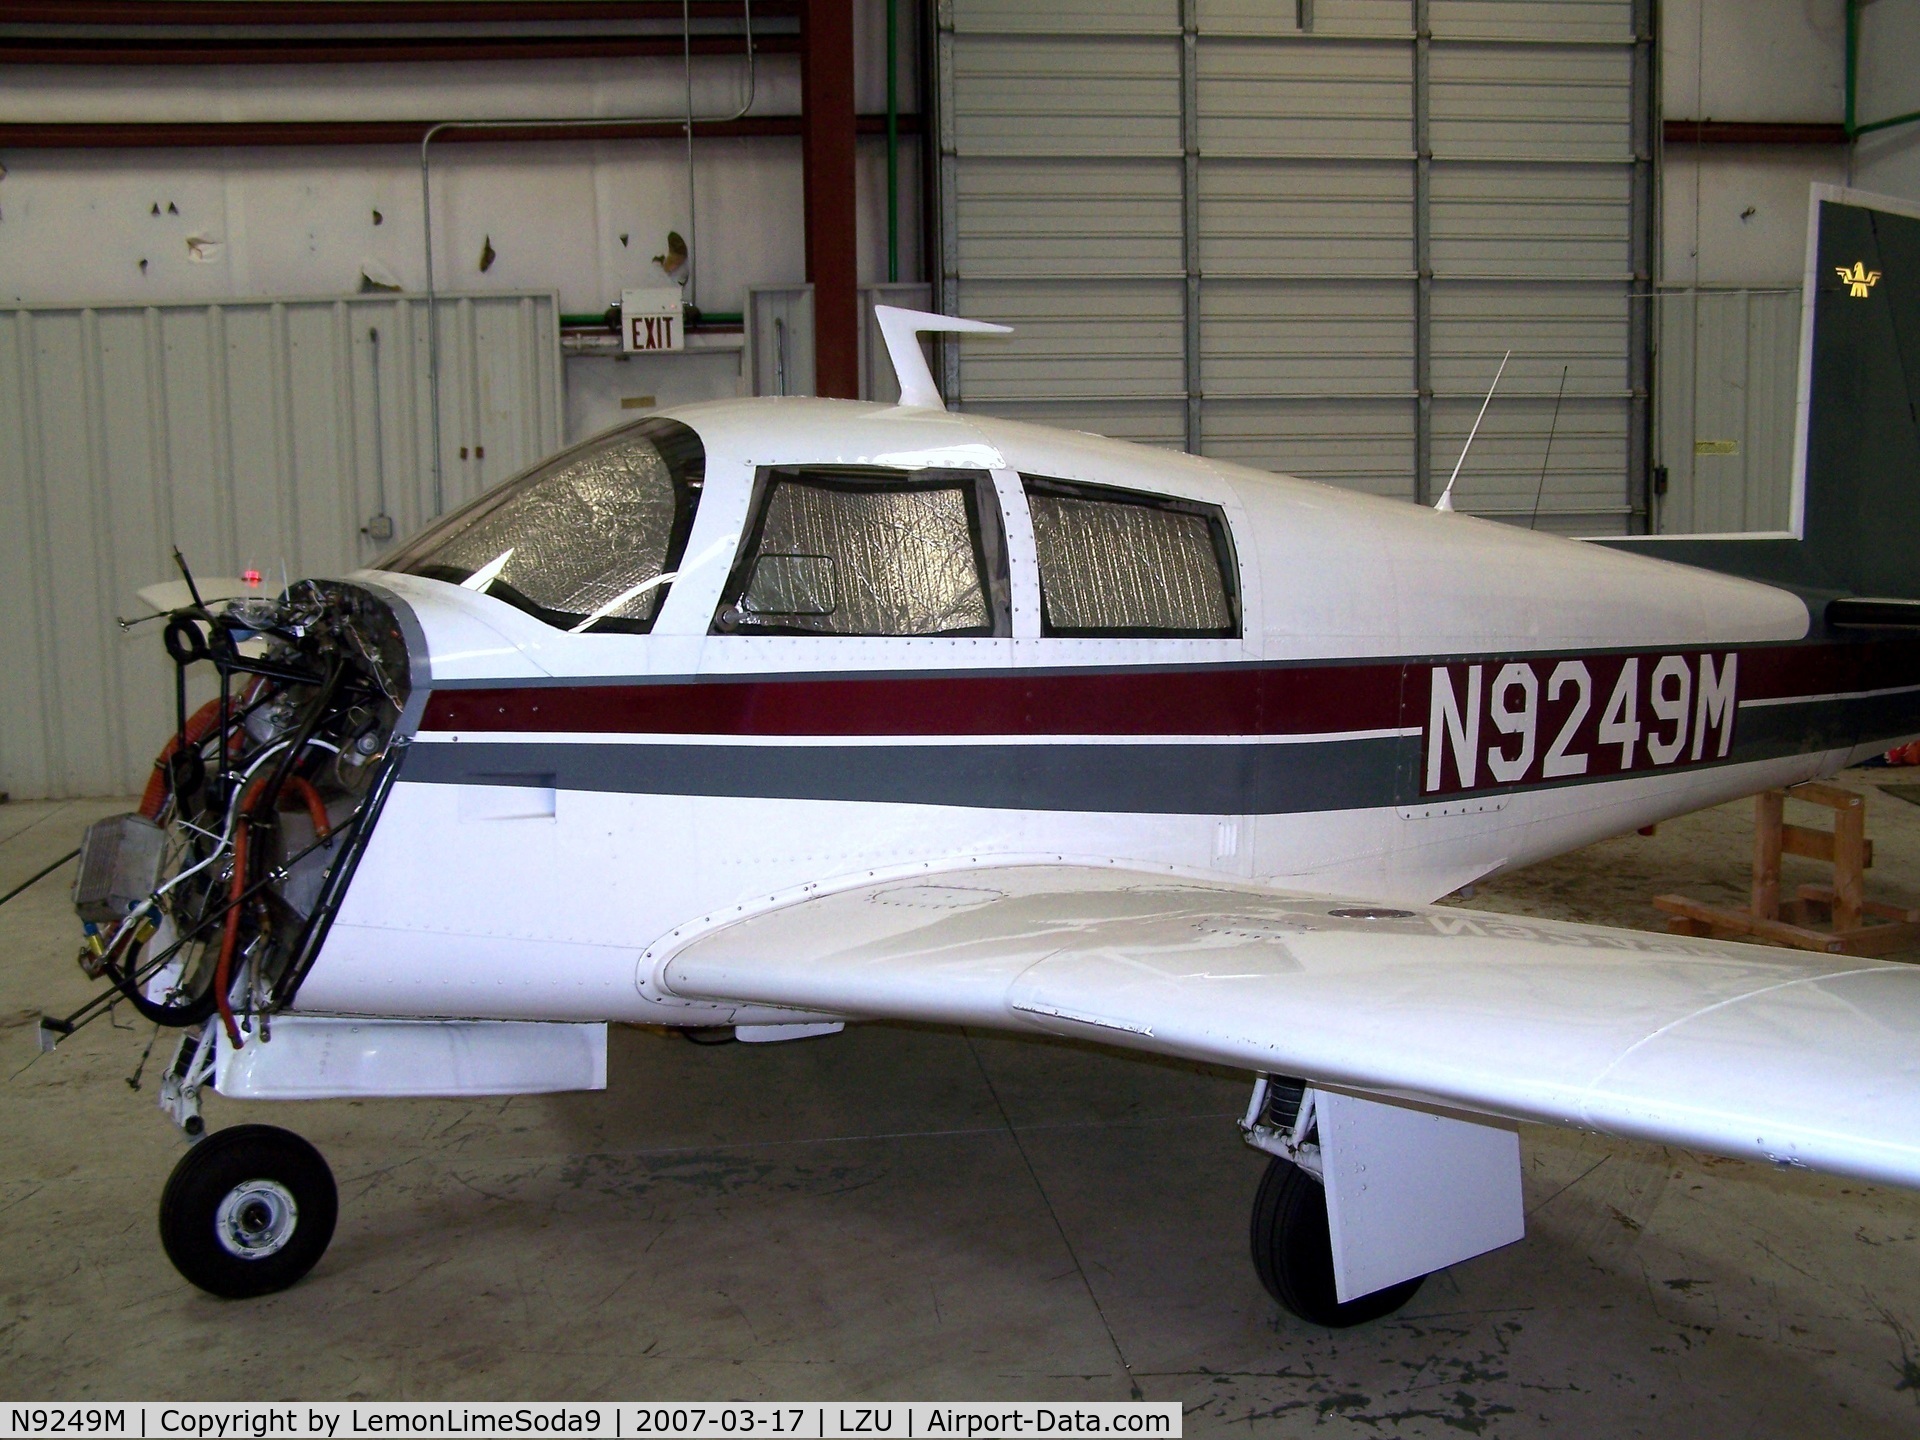 N9249M, 1966 Mooney M20E C/N 1198, Just another day.